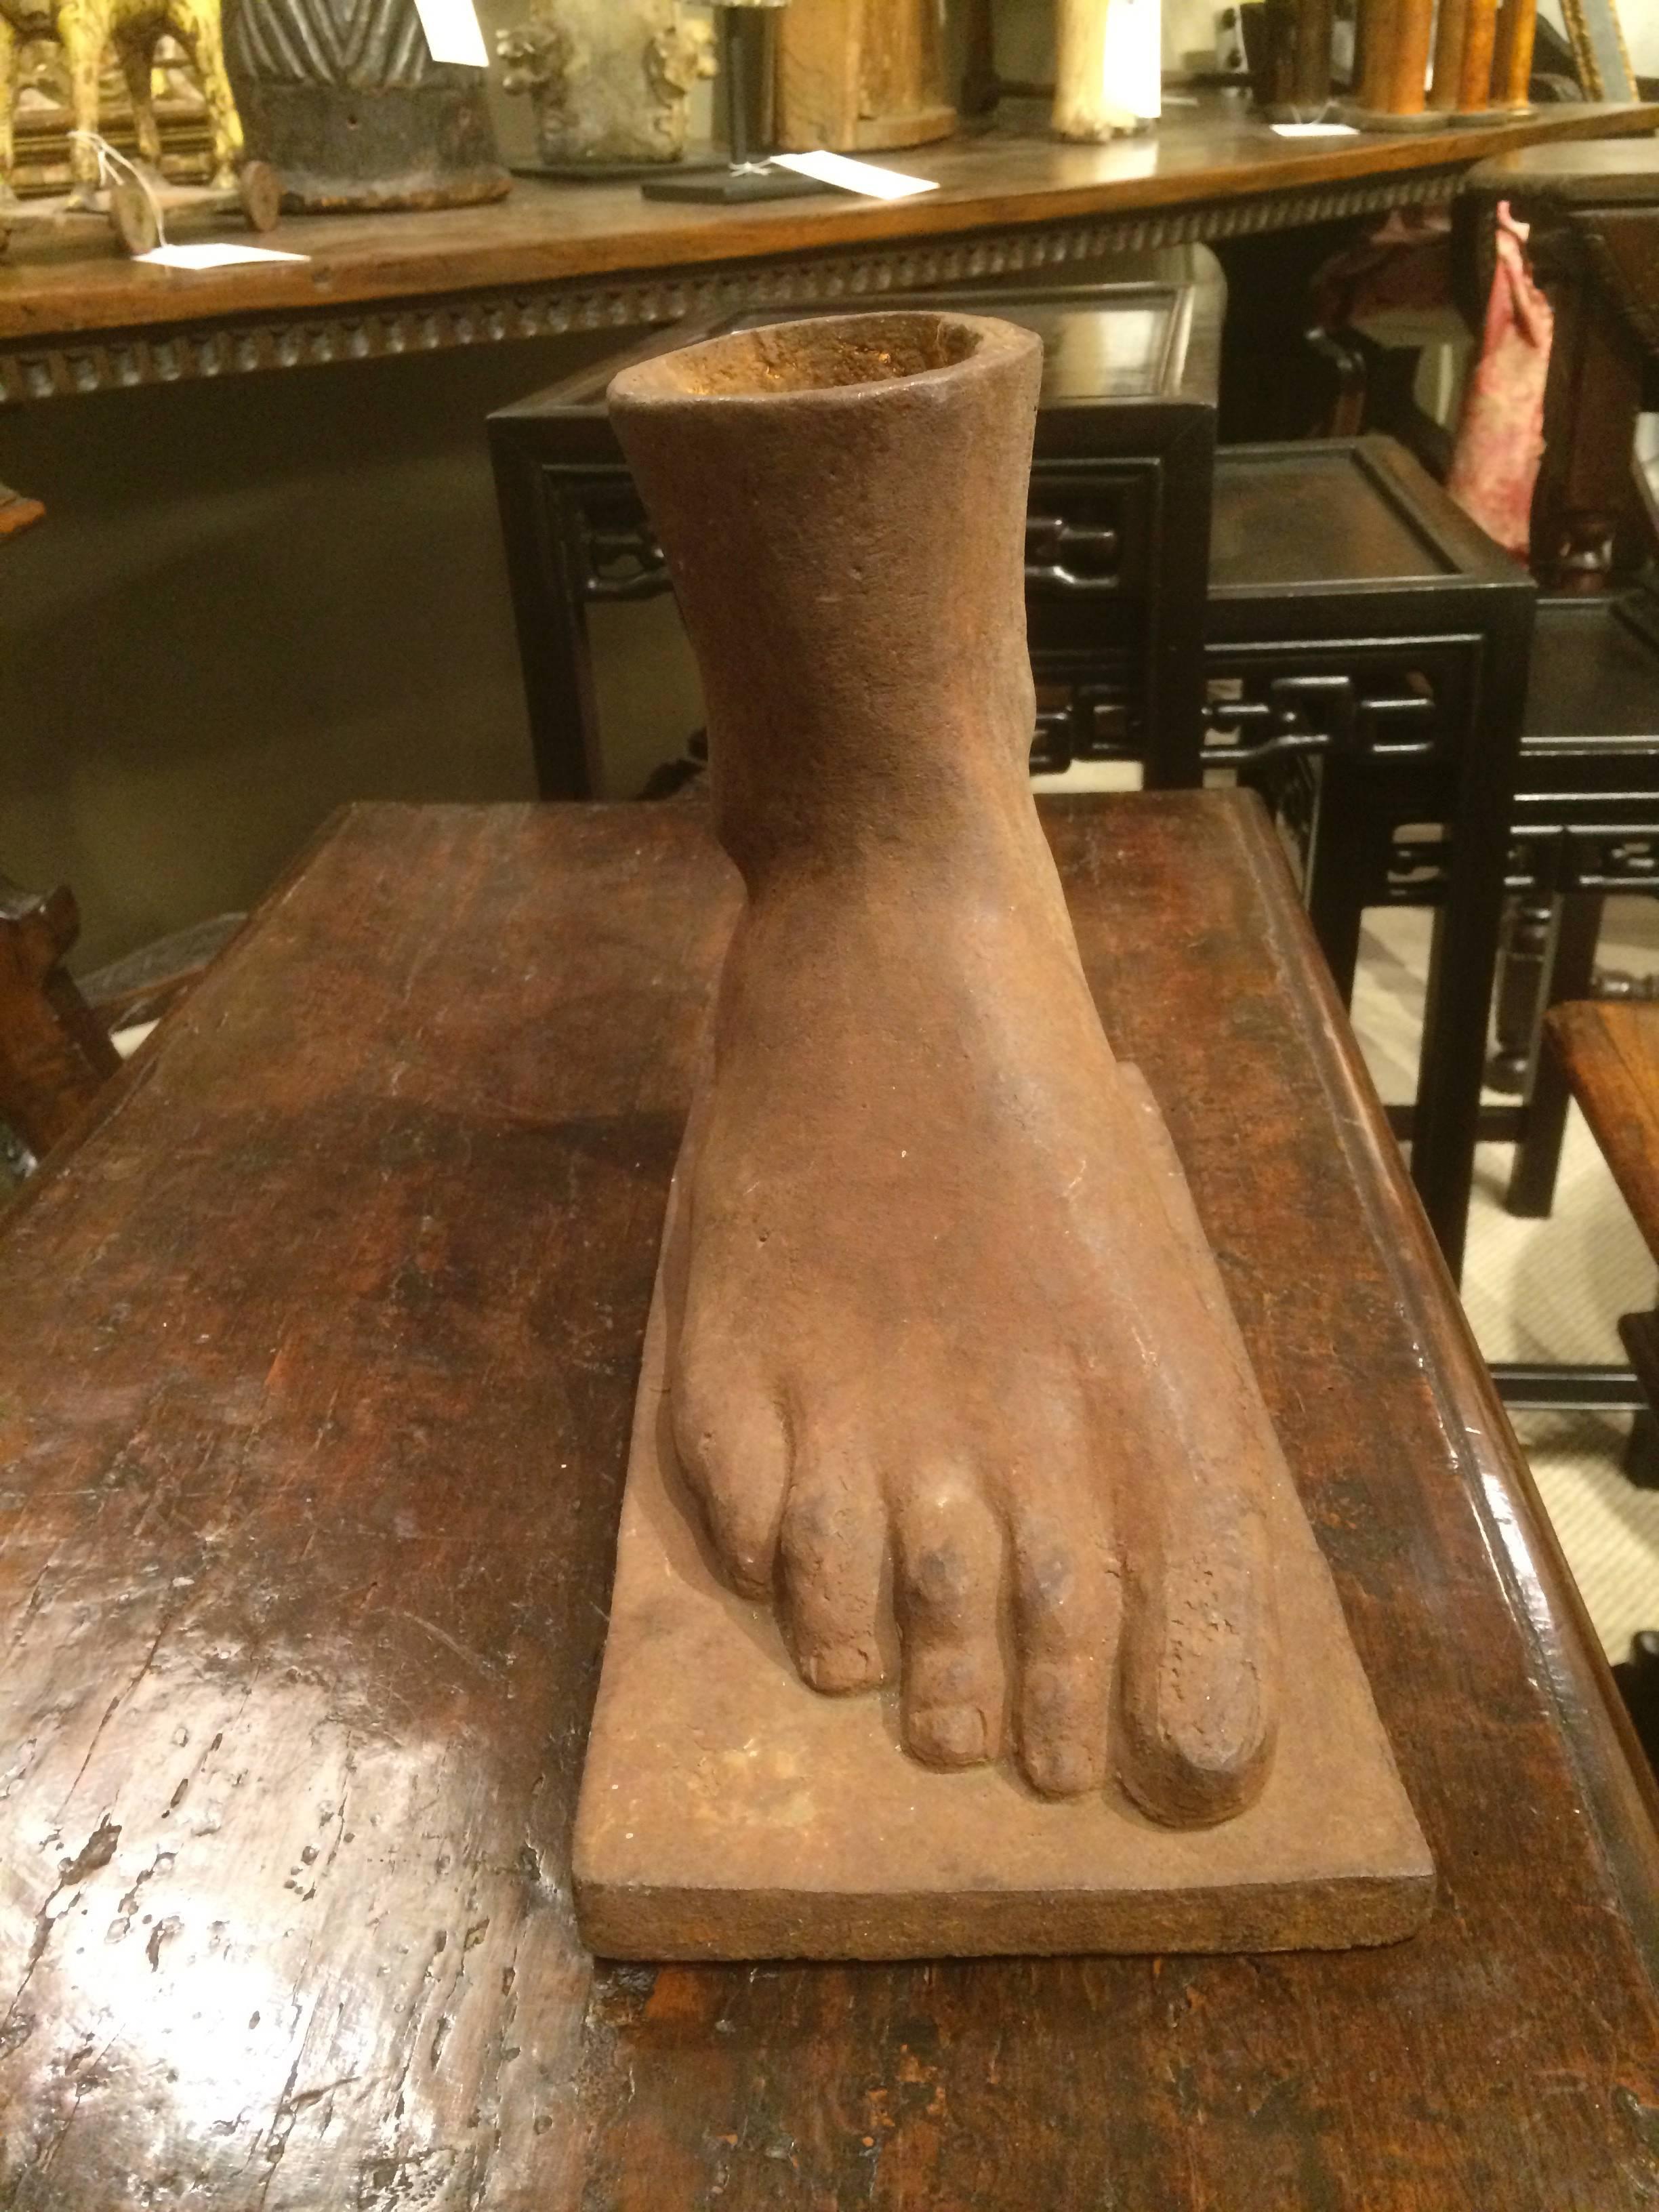 The perfect gift for the loved one with the foot fetish, or your cousin the reflexologist, or podiatrist, ... a cast iron right foot, American, circa 1920's. Will make a unique vase or pen holder too.